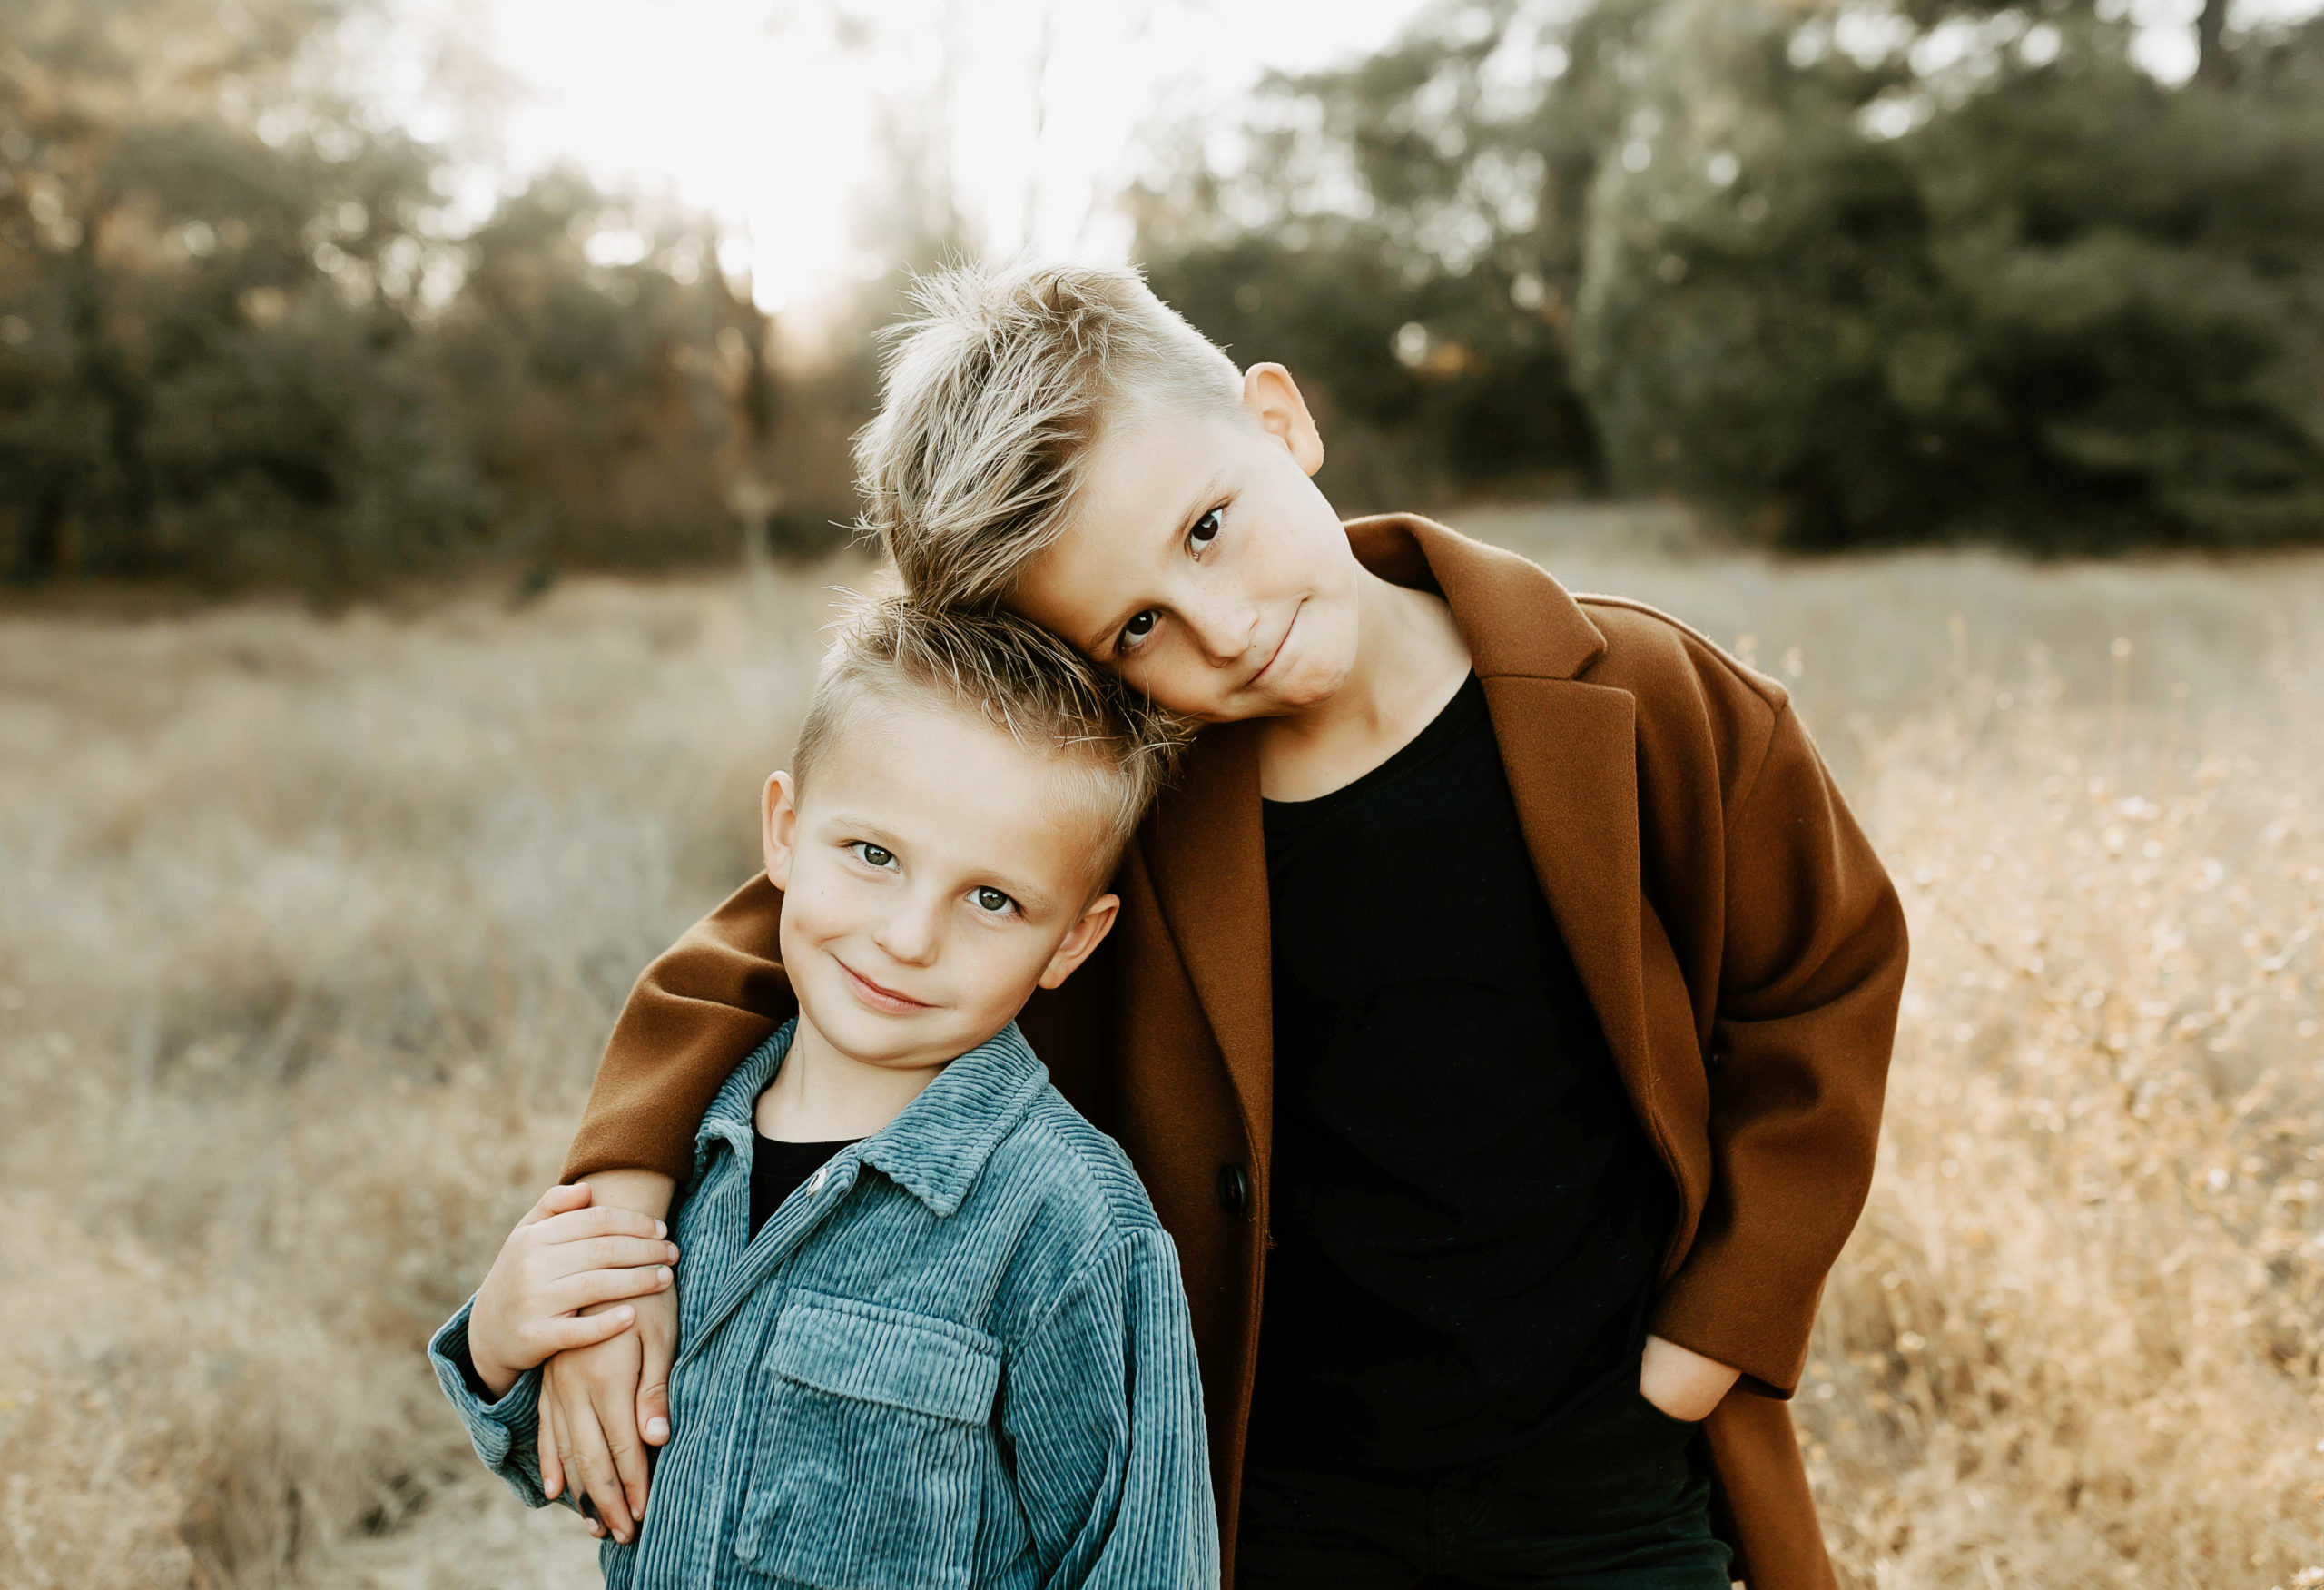 Easy Ways to get Natural Family Poses for Photos | Jillian Goulding